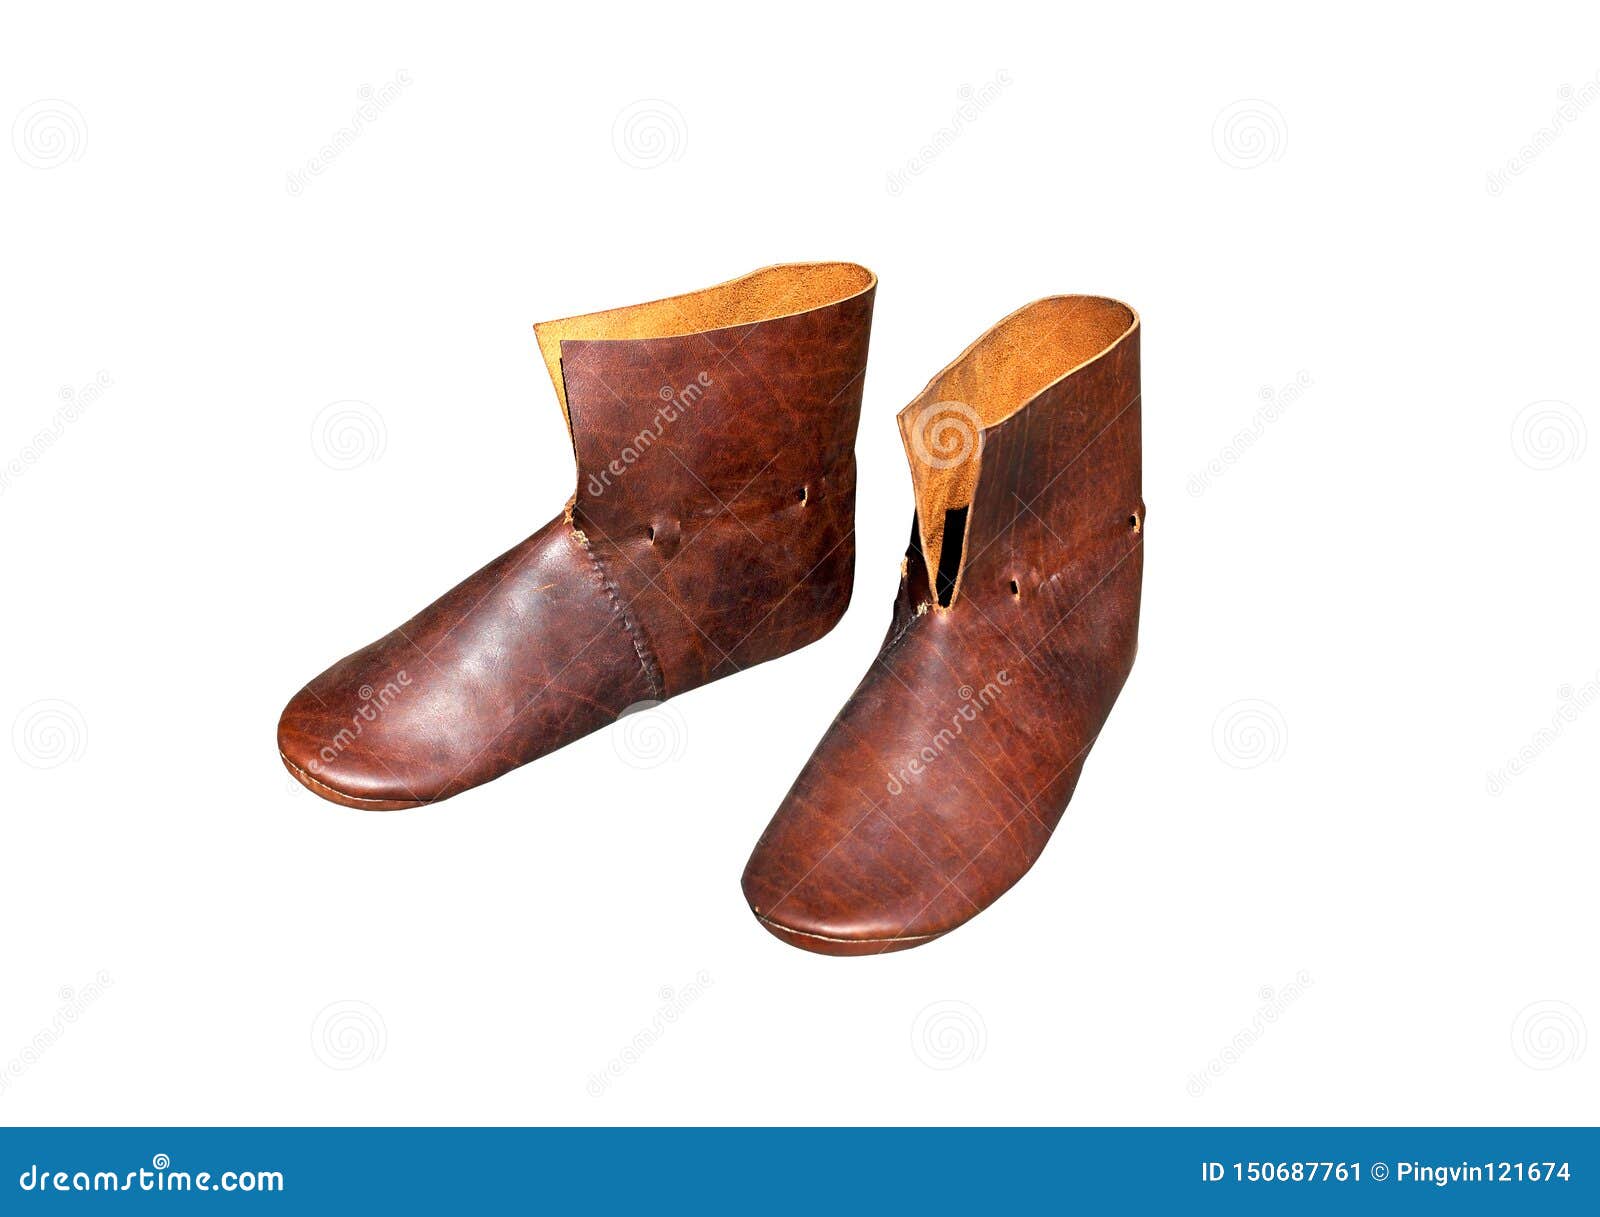 Vintage men`s shoes stock image. Image of brown, isolated - 150687761